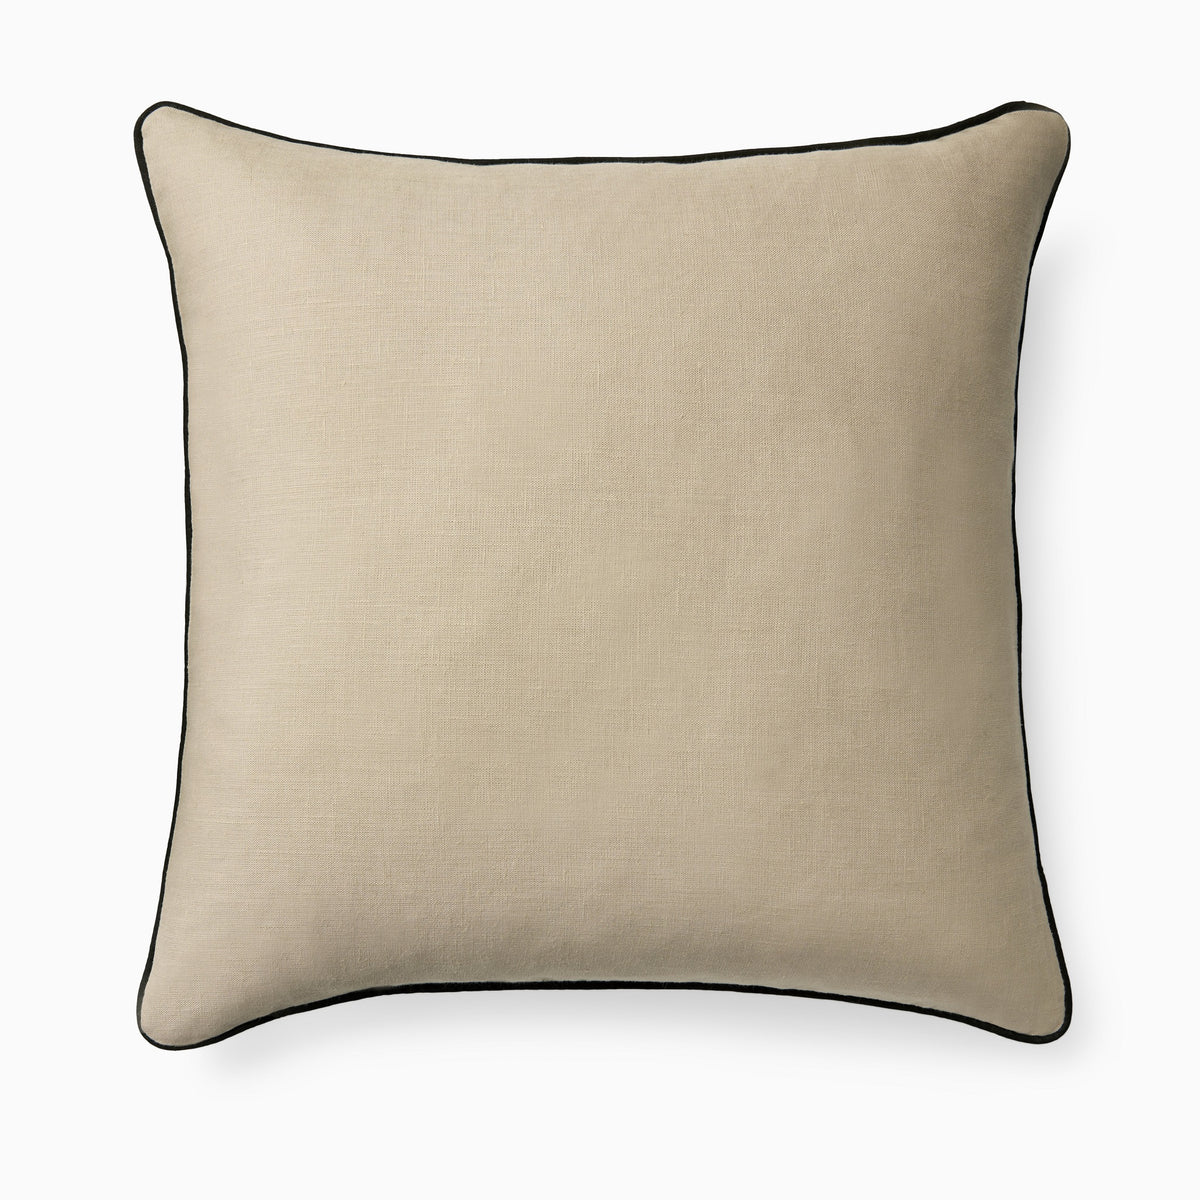 Clear Image of Sferra Manarola Decorative Pillow in Natural/Black Front